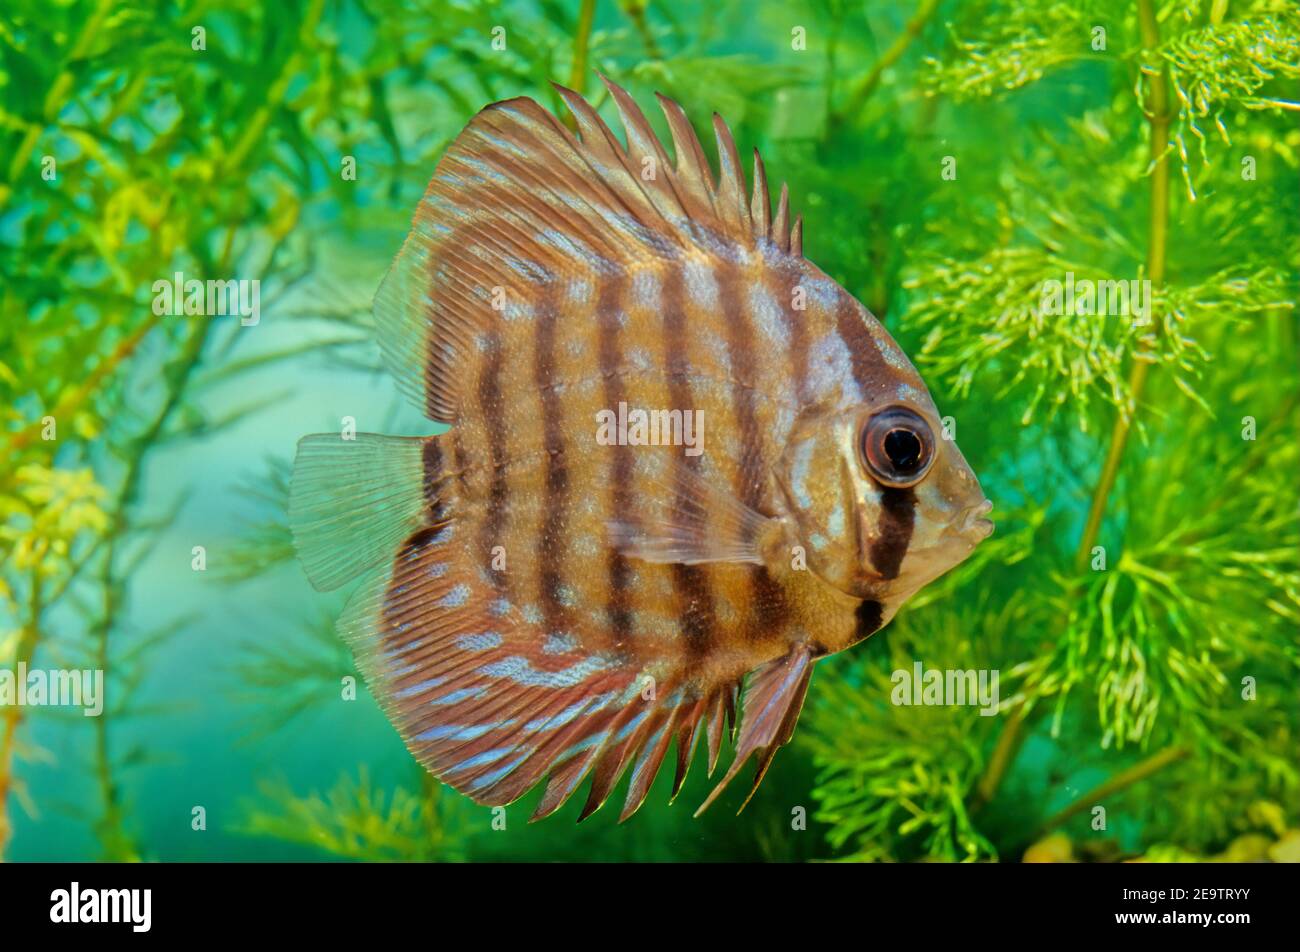 Symphysodon aequifasciatus, the blue discus or brown discus, is a species of cichlid native to rivers of the eastern and central Amazon Basin downrive Stock Photo